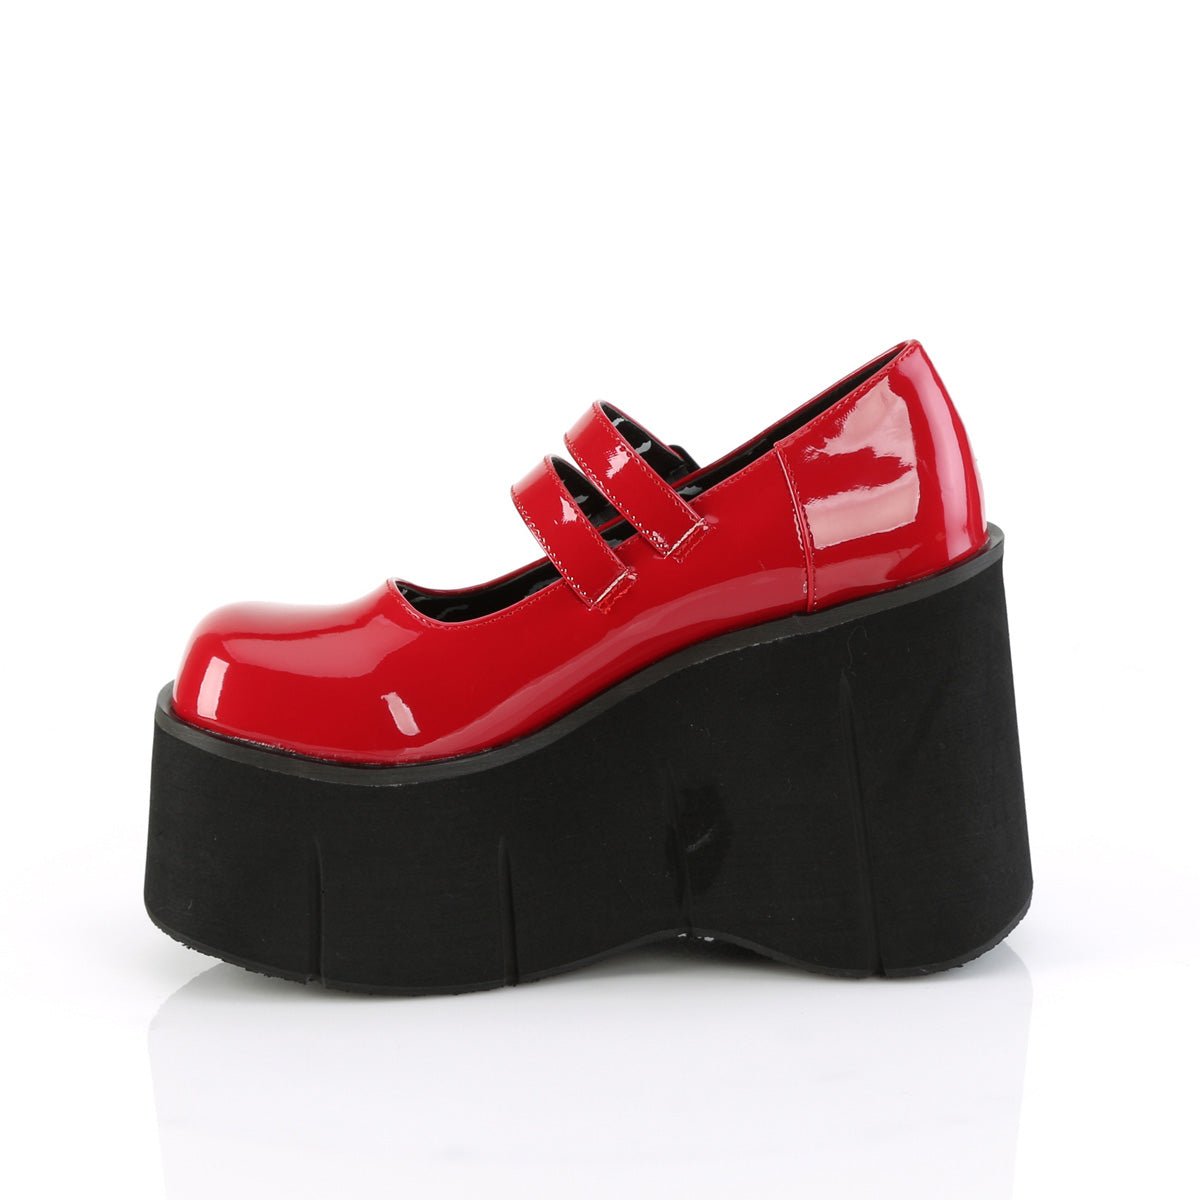 Too Fast | Demonia KERA-08 | Red Patent Leather Mary Janes